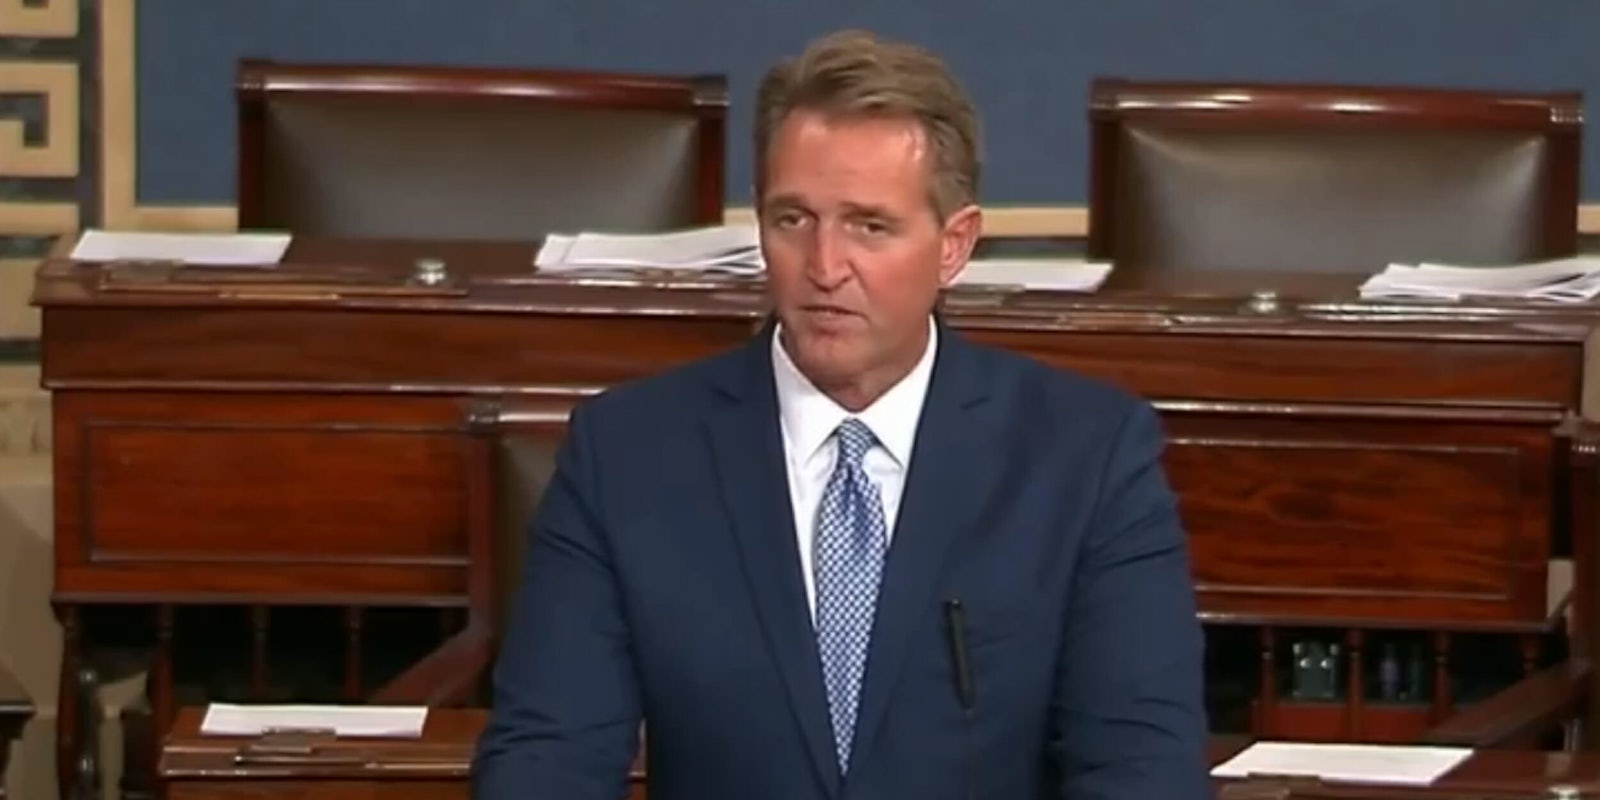 Sen. Jeff Flake roasted Donald Trump in a speech where he announced he would not seek reelection in 2018.